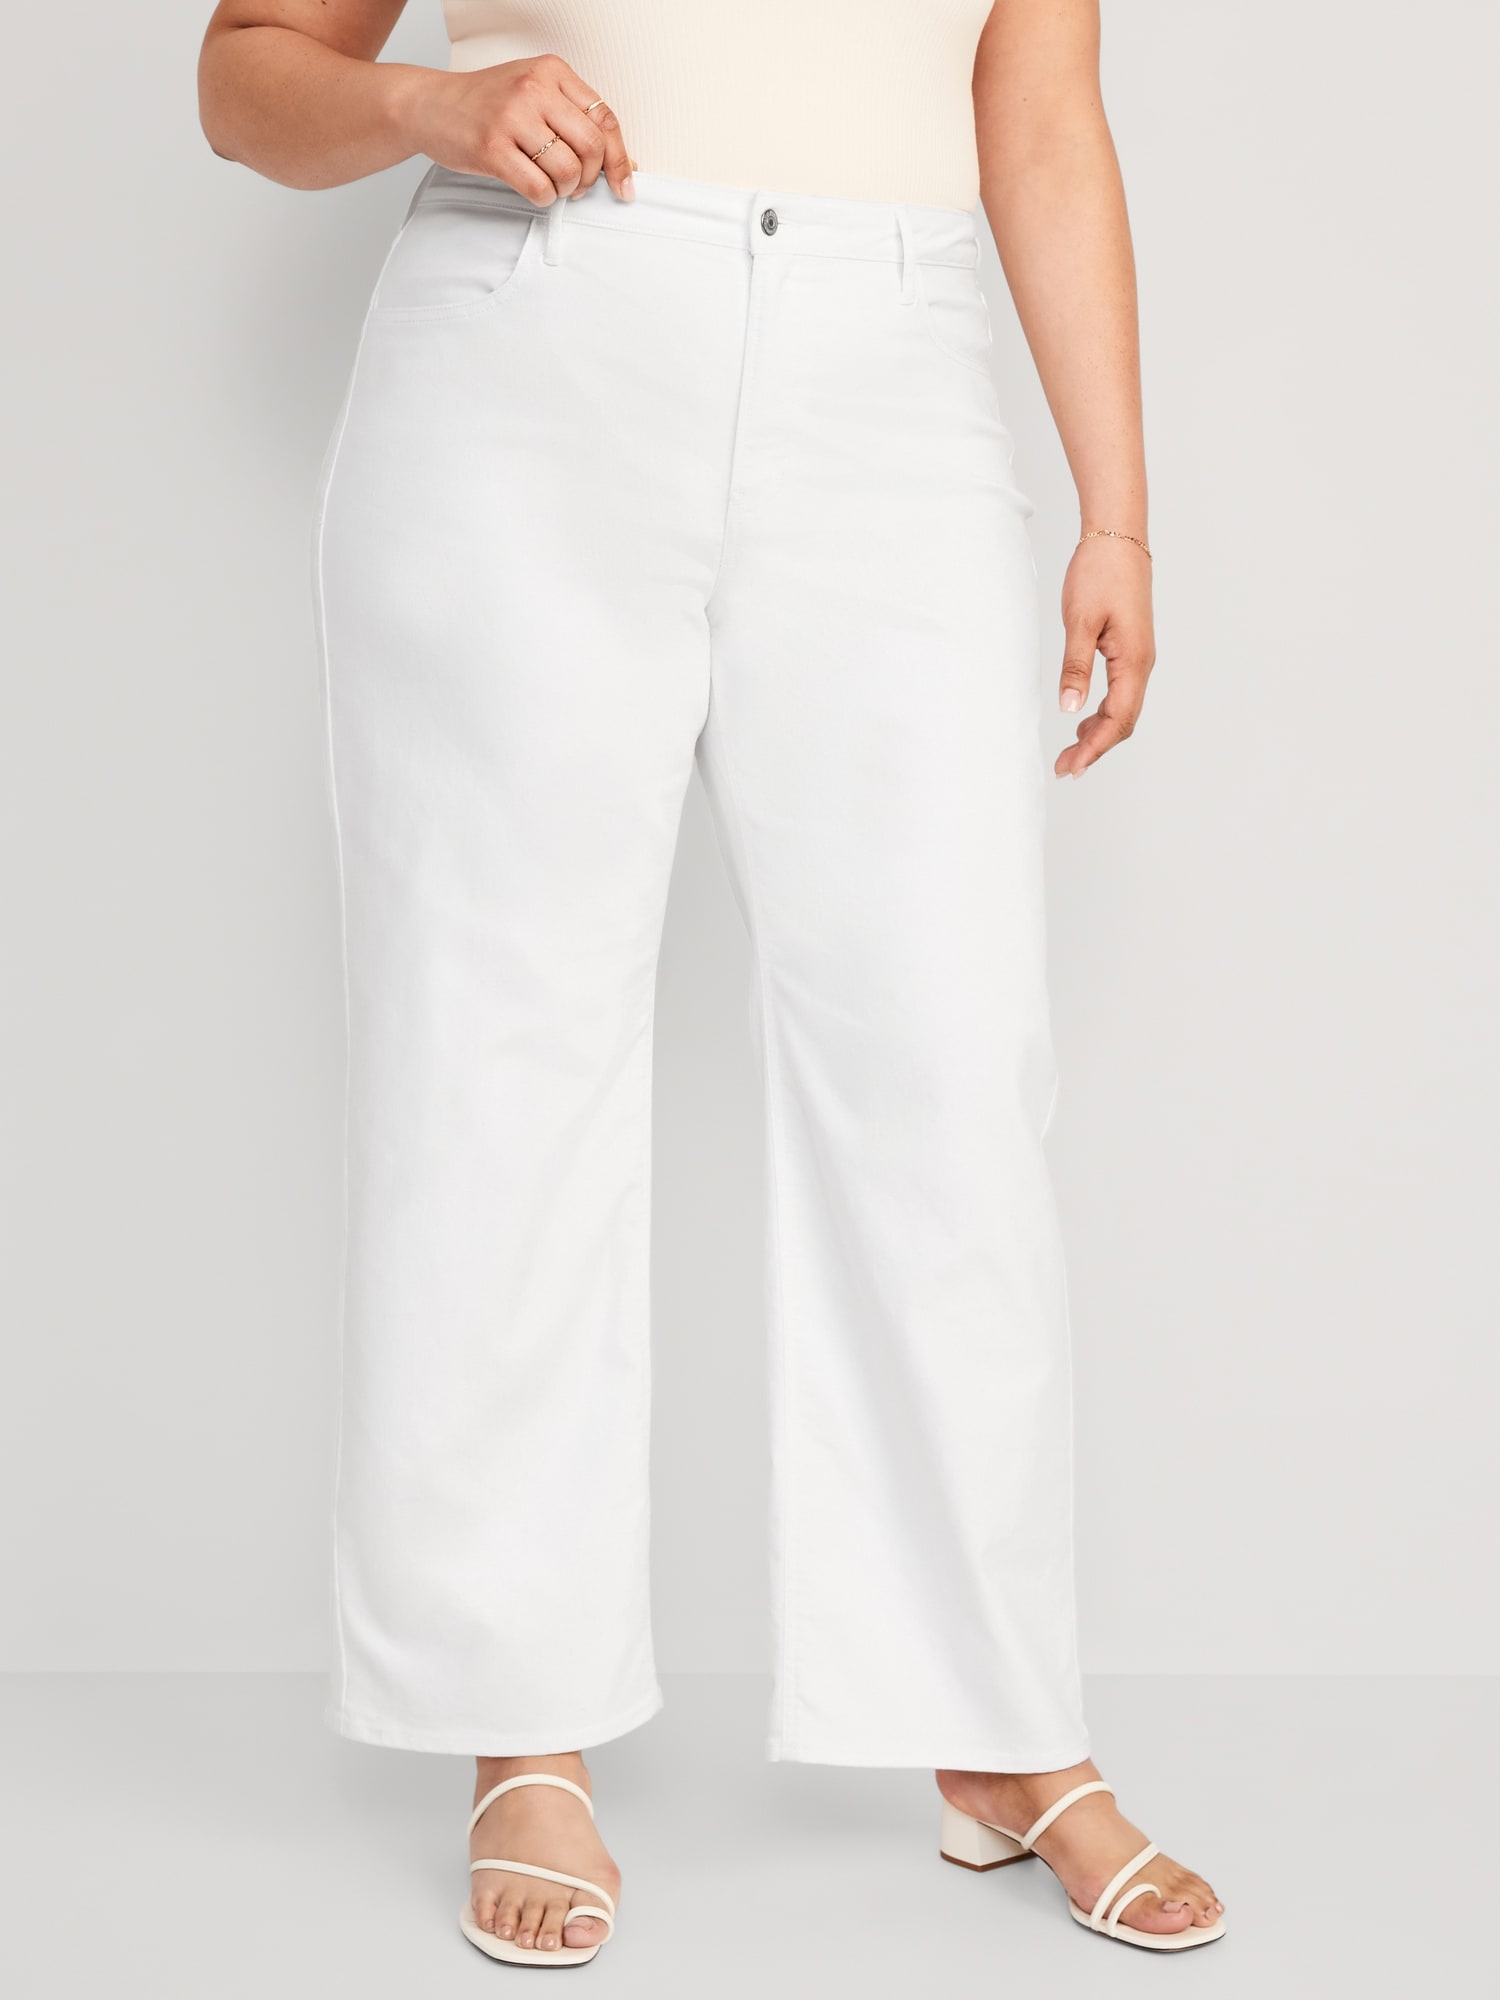 White Jeans Women Wide Leg Jeans High Waisted Baggy Classic